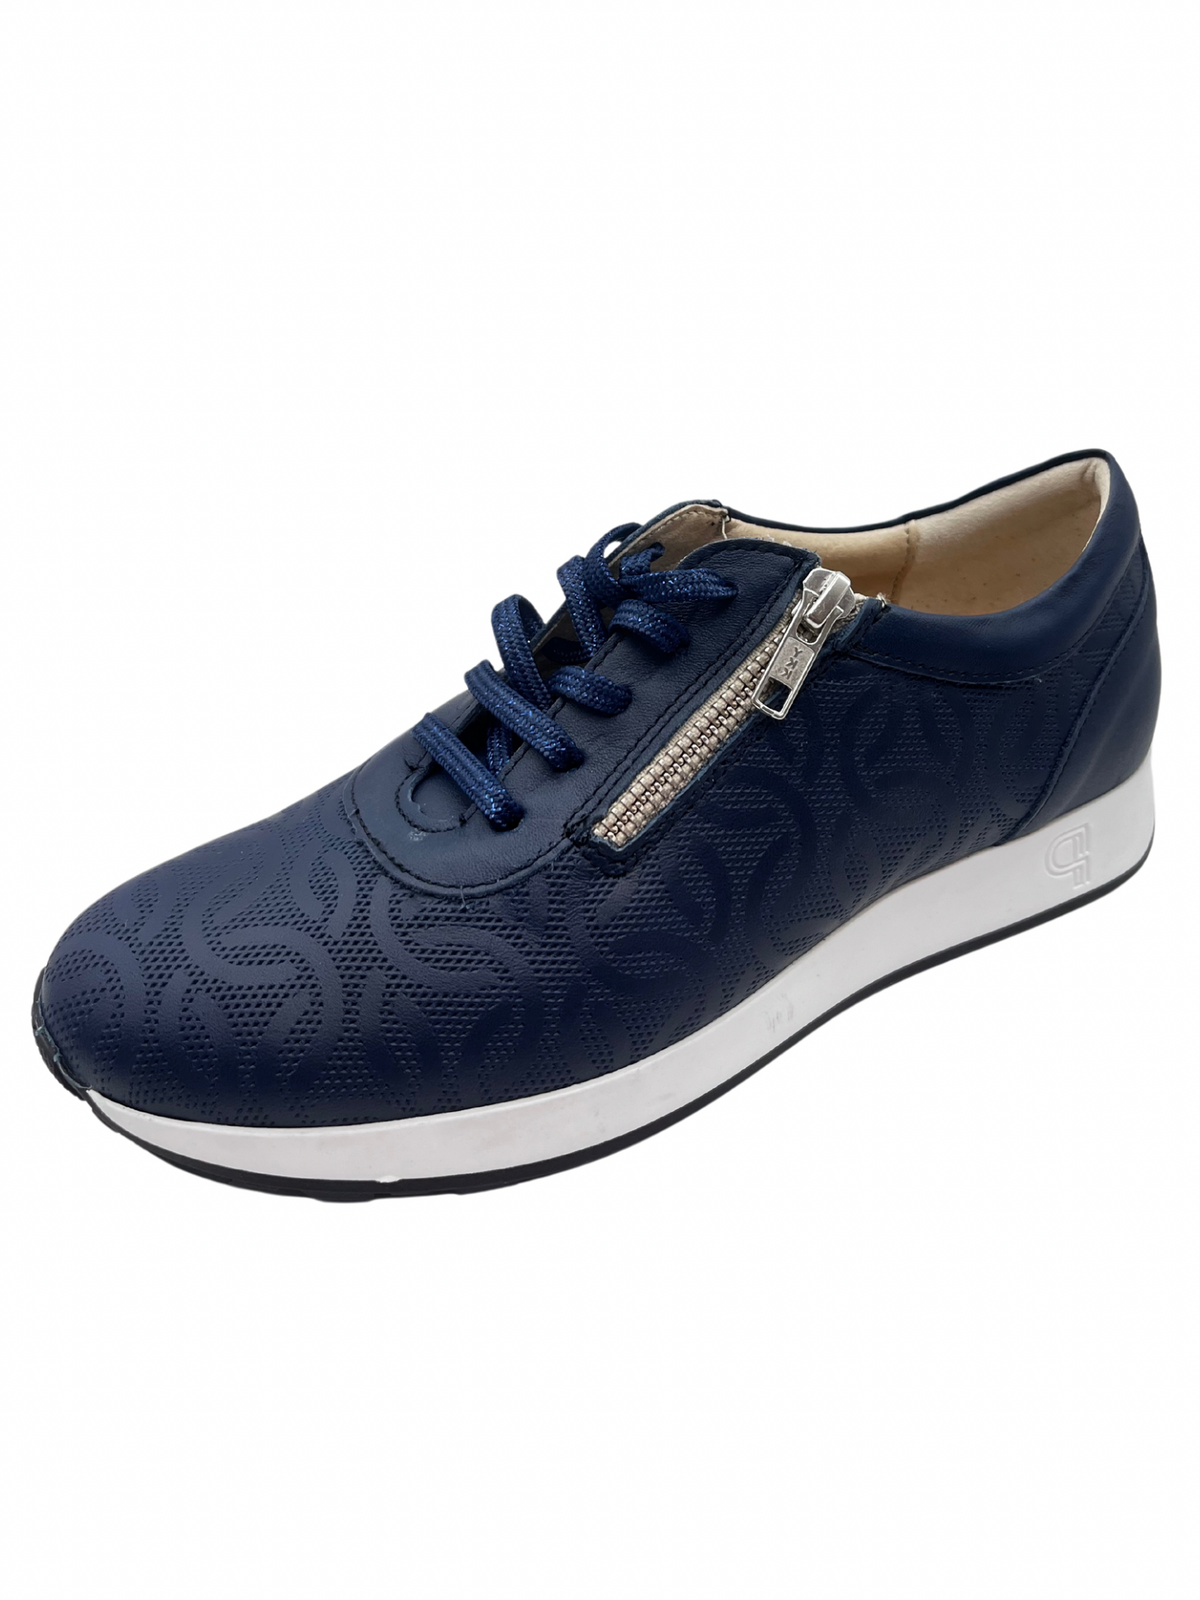 Pitillos Navy Leather Trainer With Perforated Details